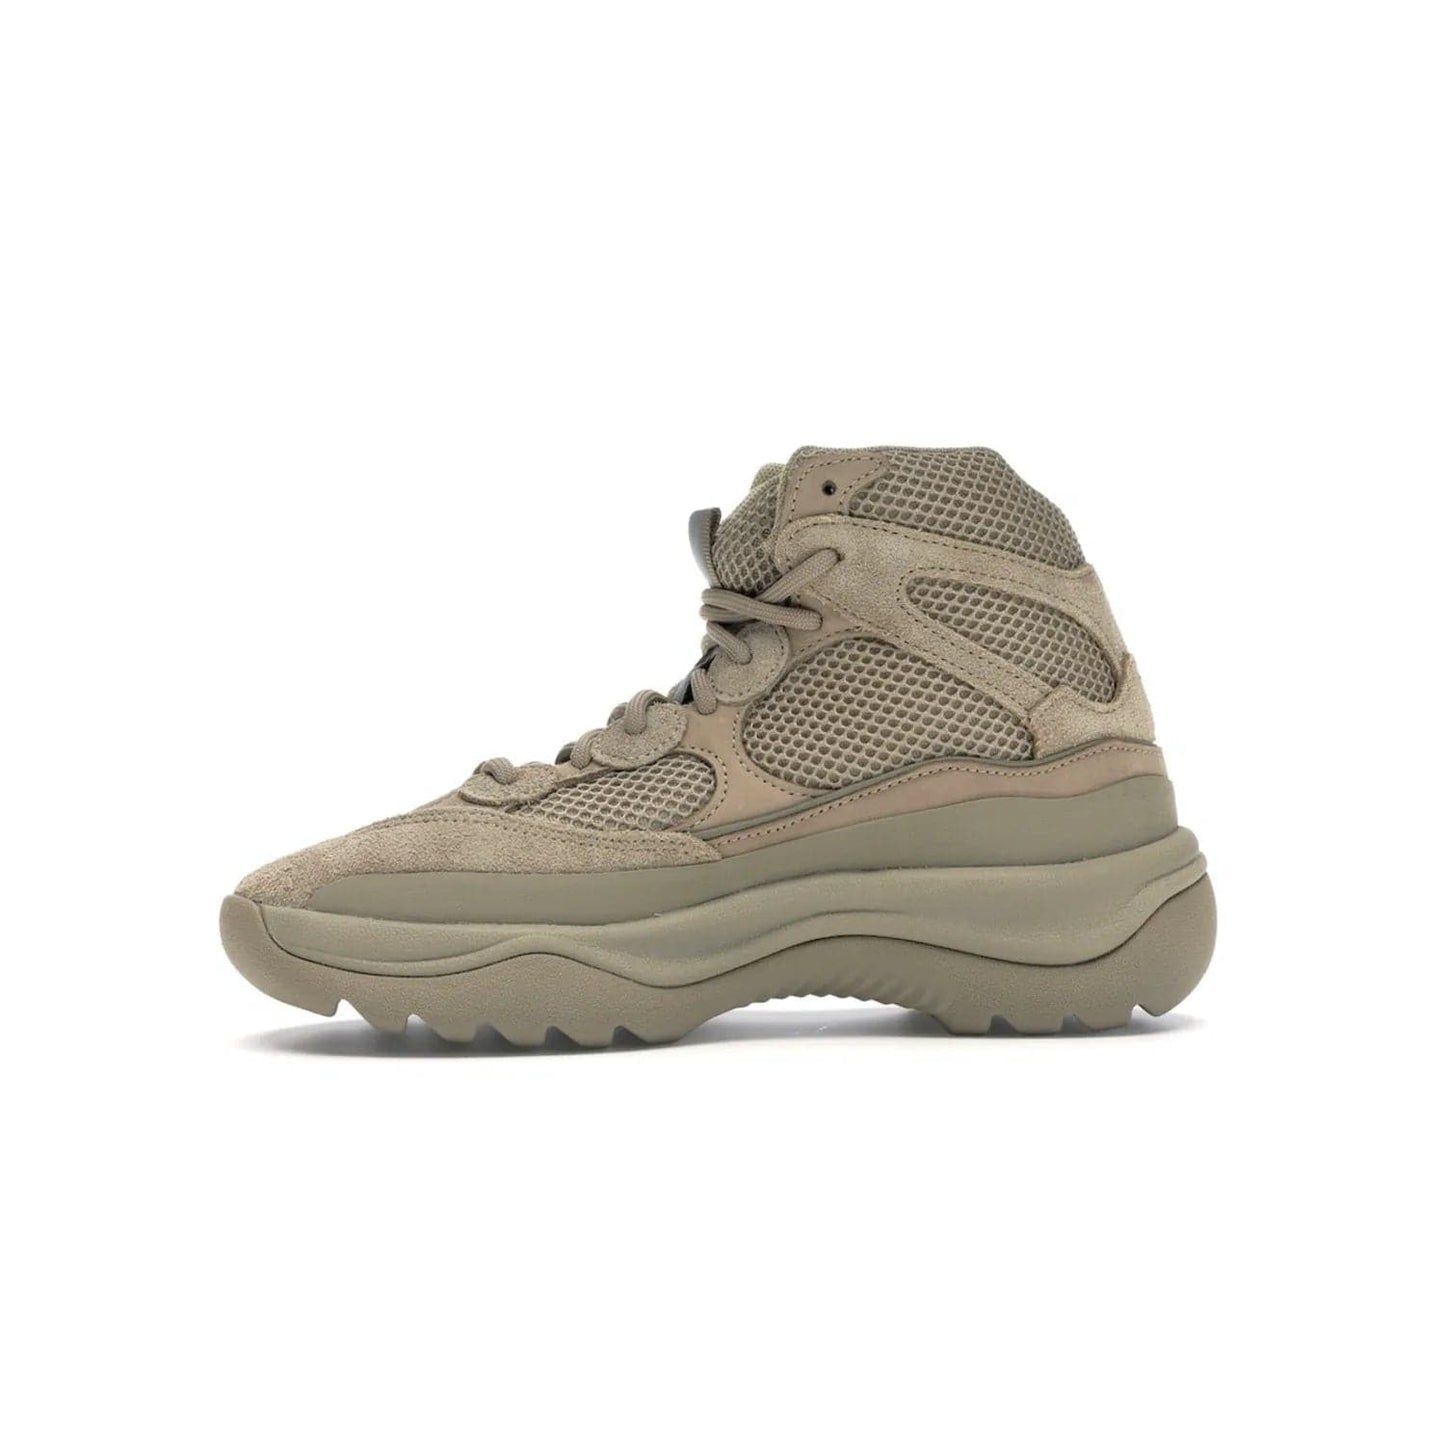 adidas Yeezy Desert Boot Rock - Image 18 - Only at www.BallersClubKickz.com - #
This season, make a fashion statement with the adidas Yeezy Desert Boot Rock. Nubuck and suede upper offers tonal style while the grooved sole provides traction and stability. Get yours in April 2019.